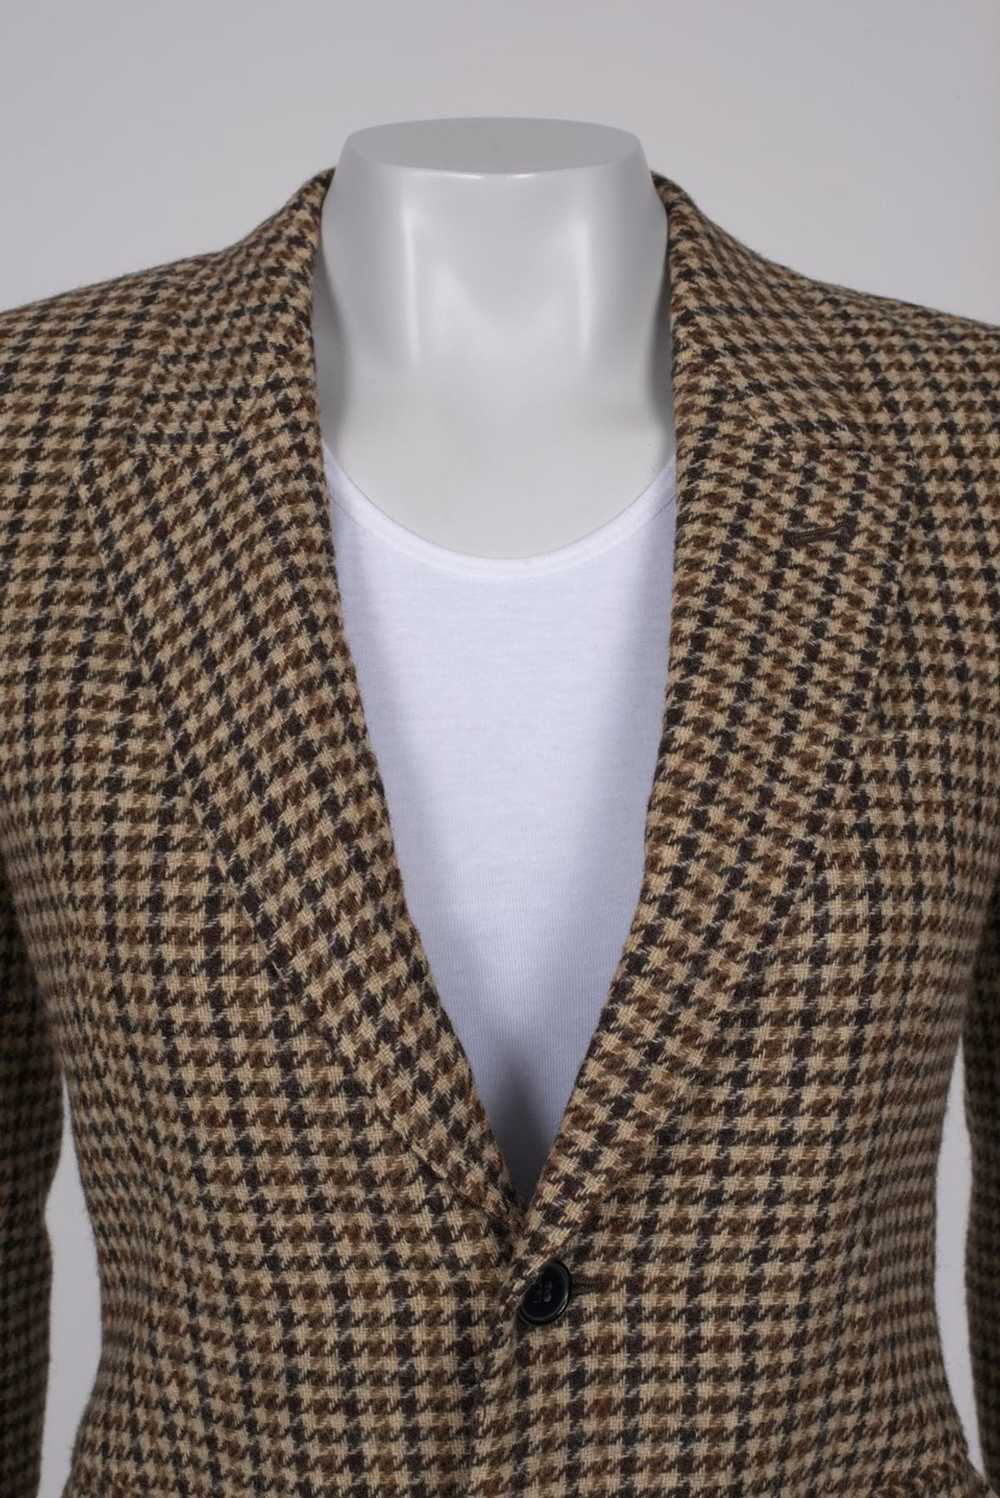 Yves Saint Laurent Jacket with a houndstooth print - image 2